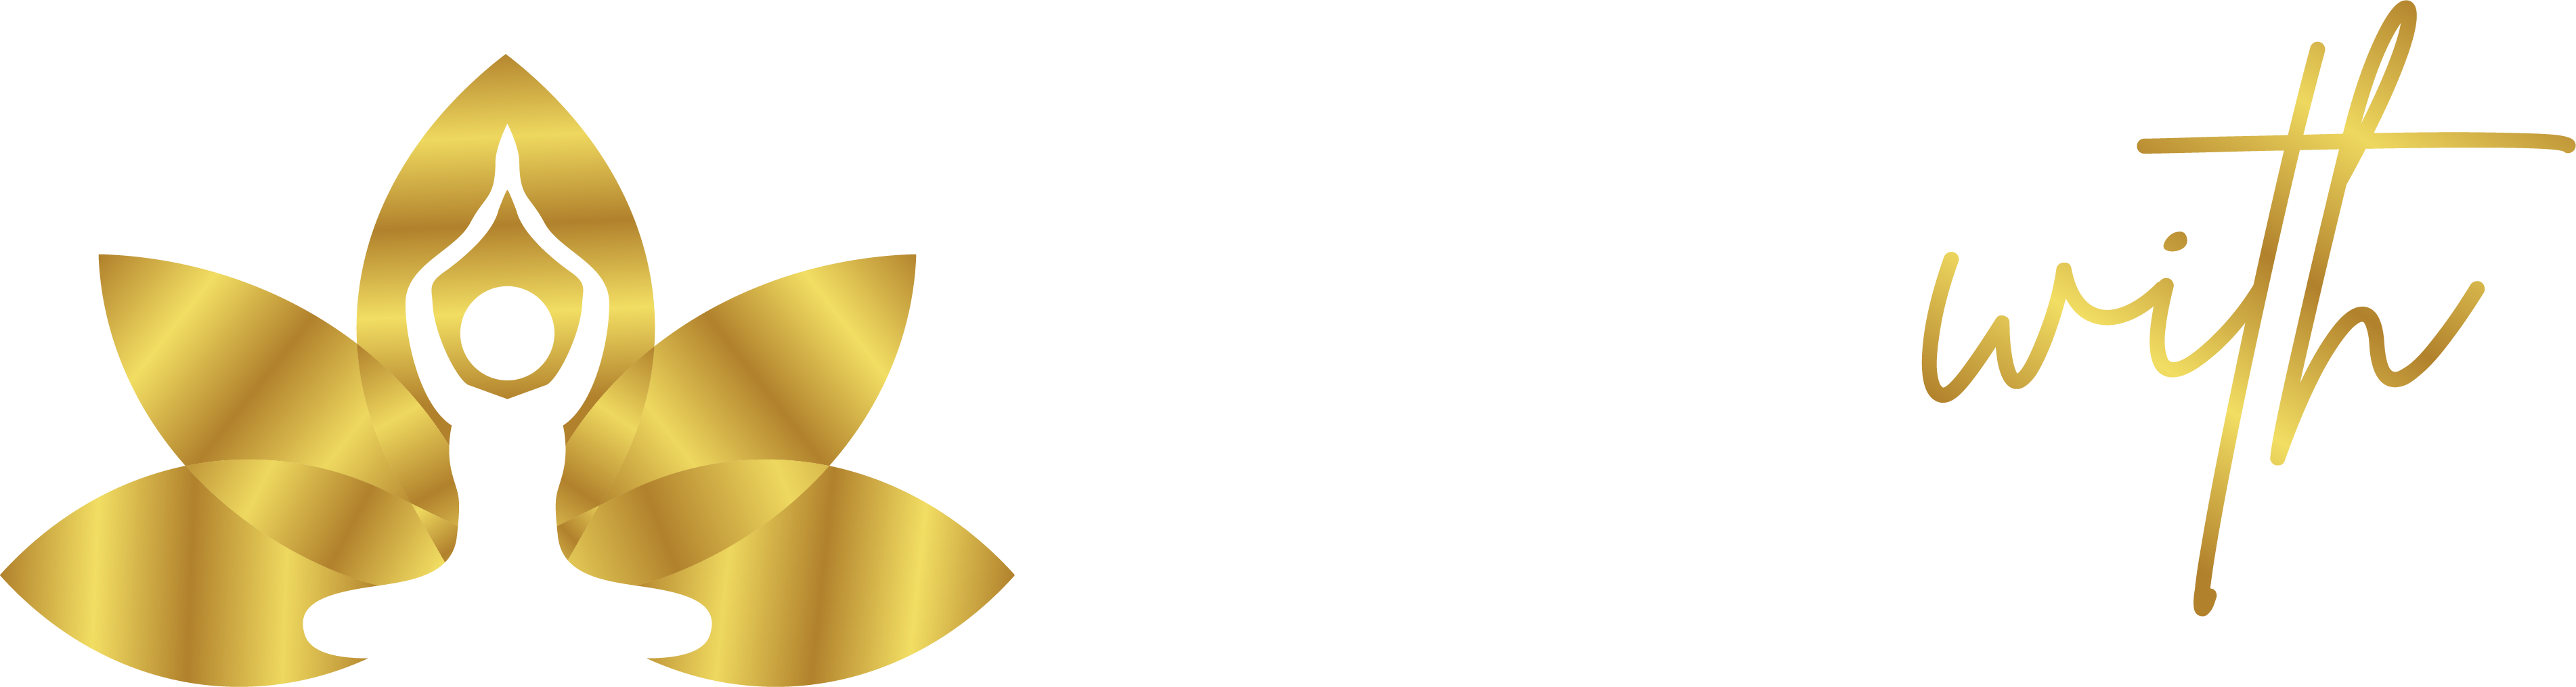 LearnWithMasters